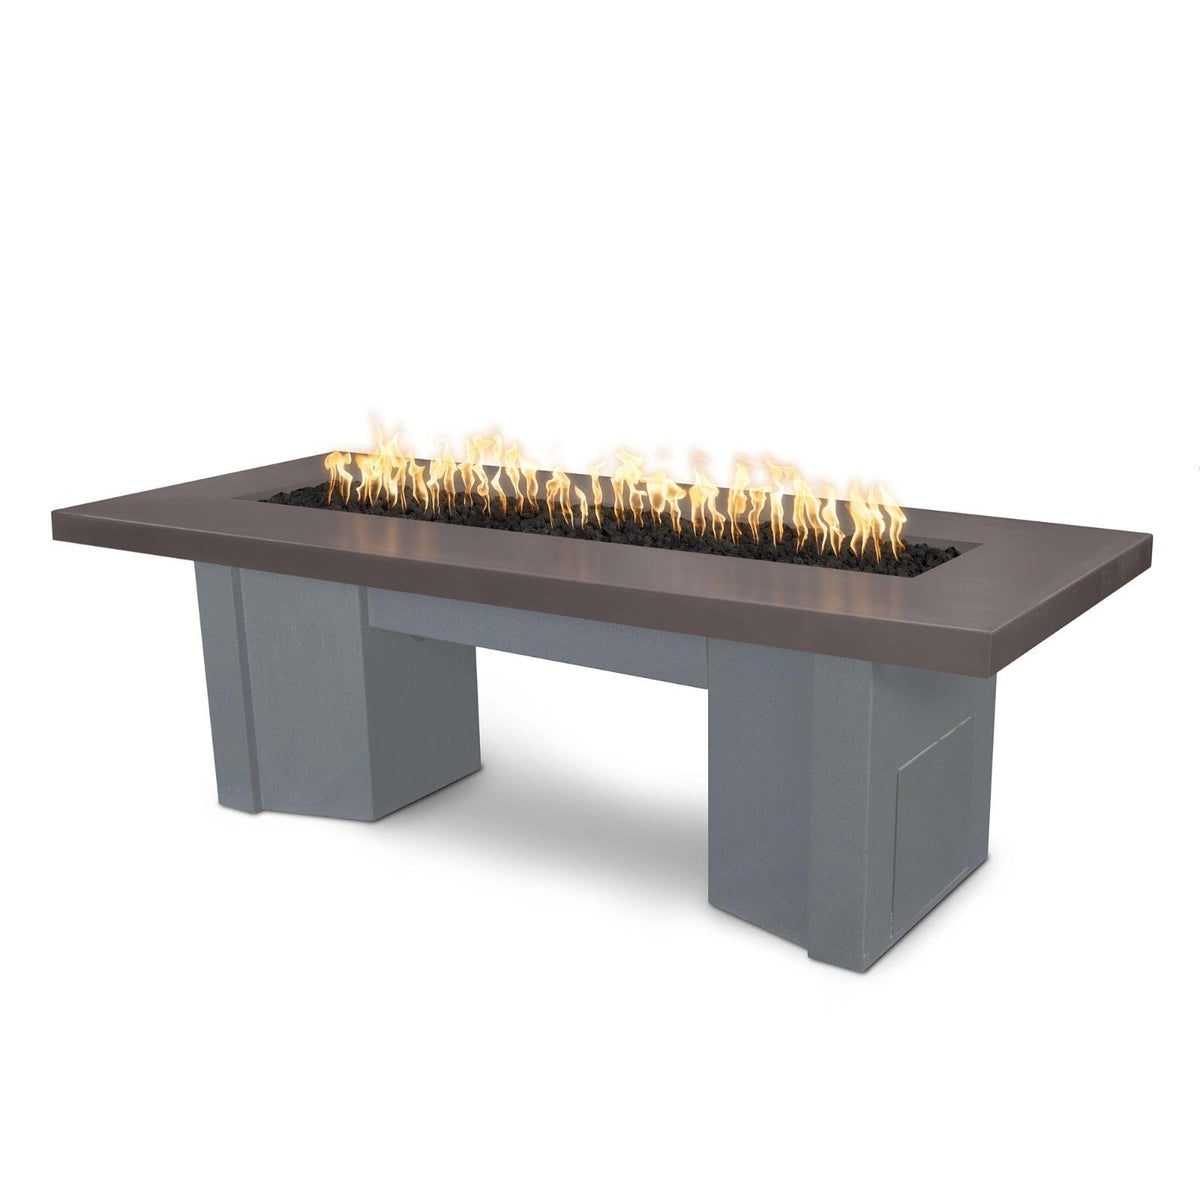 The Outdoor Plus Fire Features Chestnut (-CST) / Gray Powder Coated Steel (-GRY) The Outdoor Plus 78&quot; Alameda Fire Table Smooth Concrete in Liquid Propane - 12V Electronic Ignition / OPT-ALMGFRC78E12V-LP